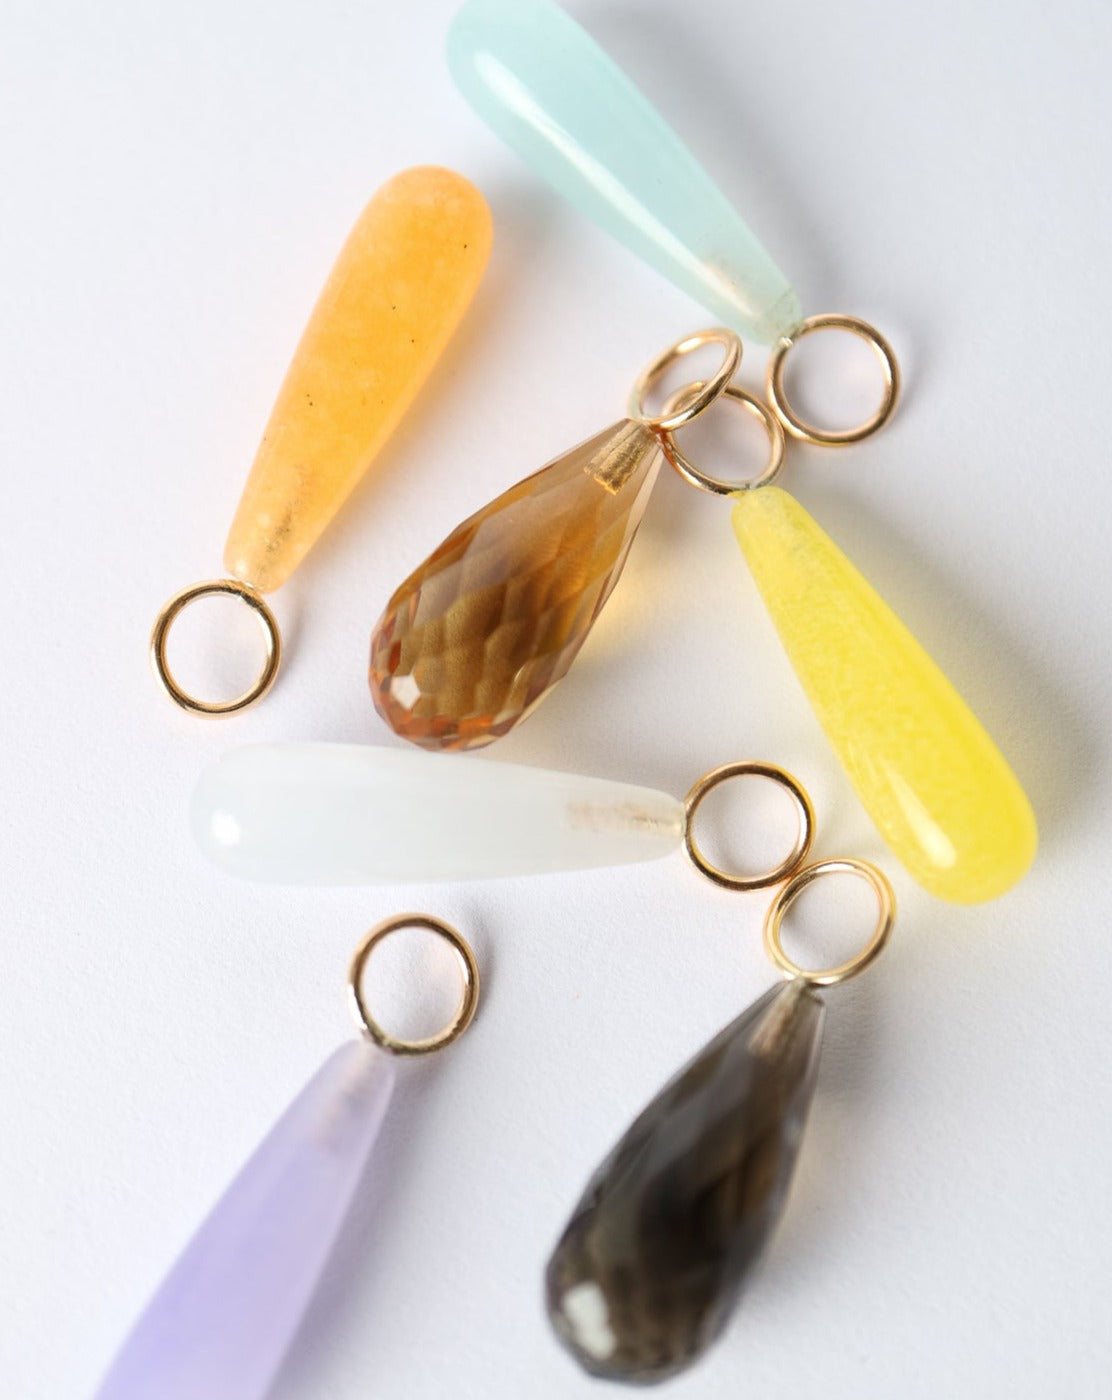 Gemstone droplet charms for earrings and pendants